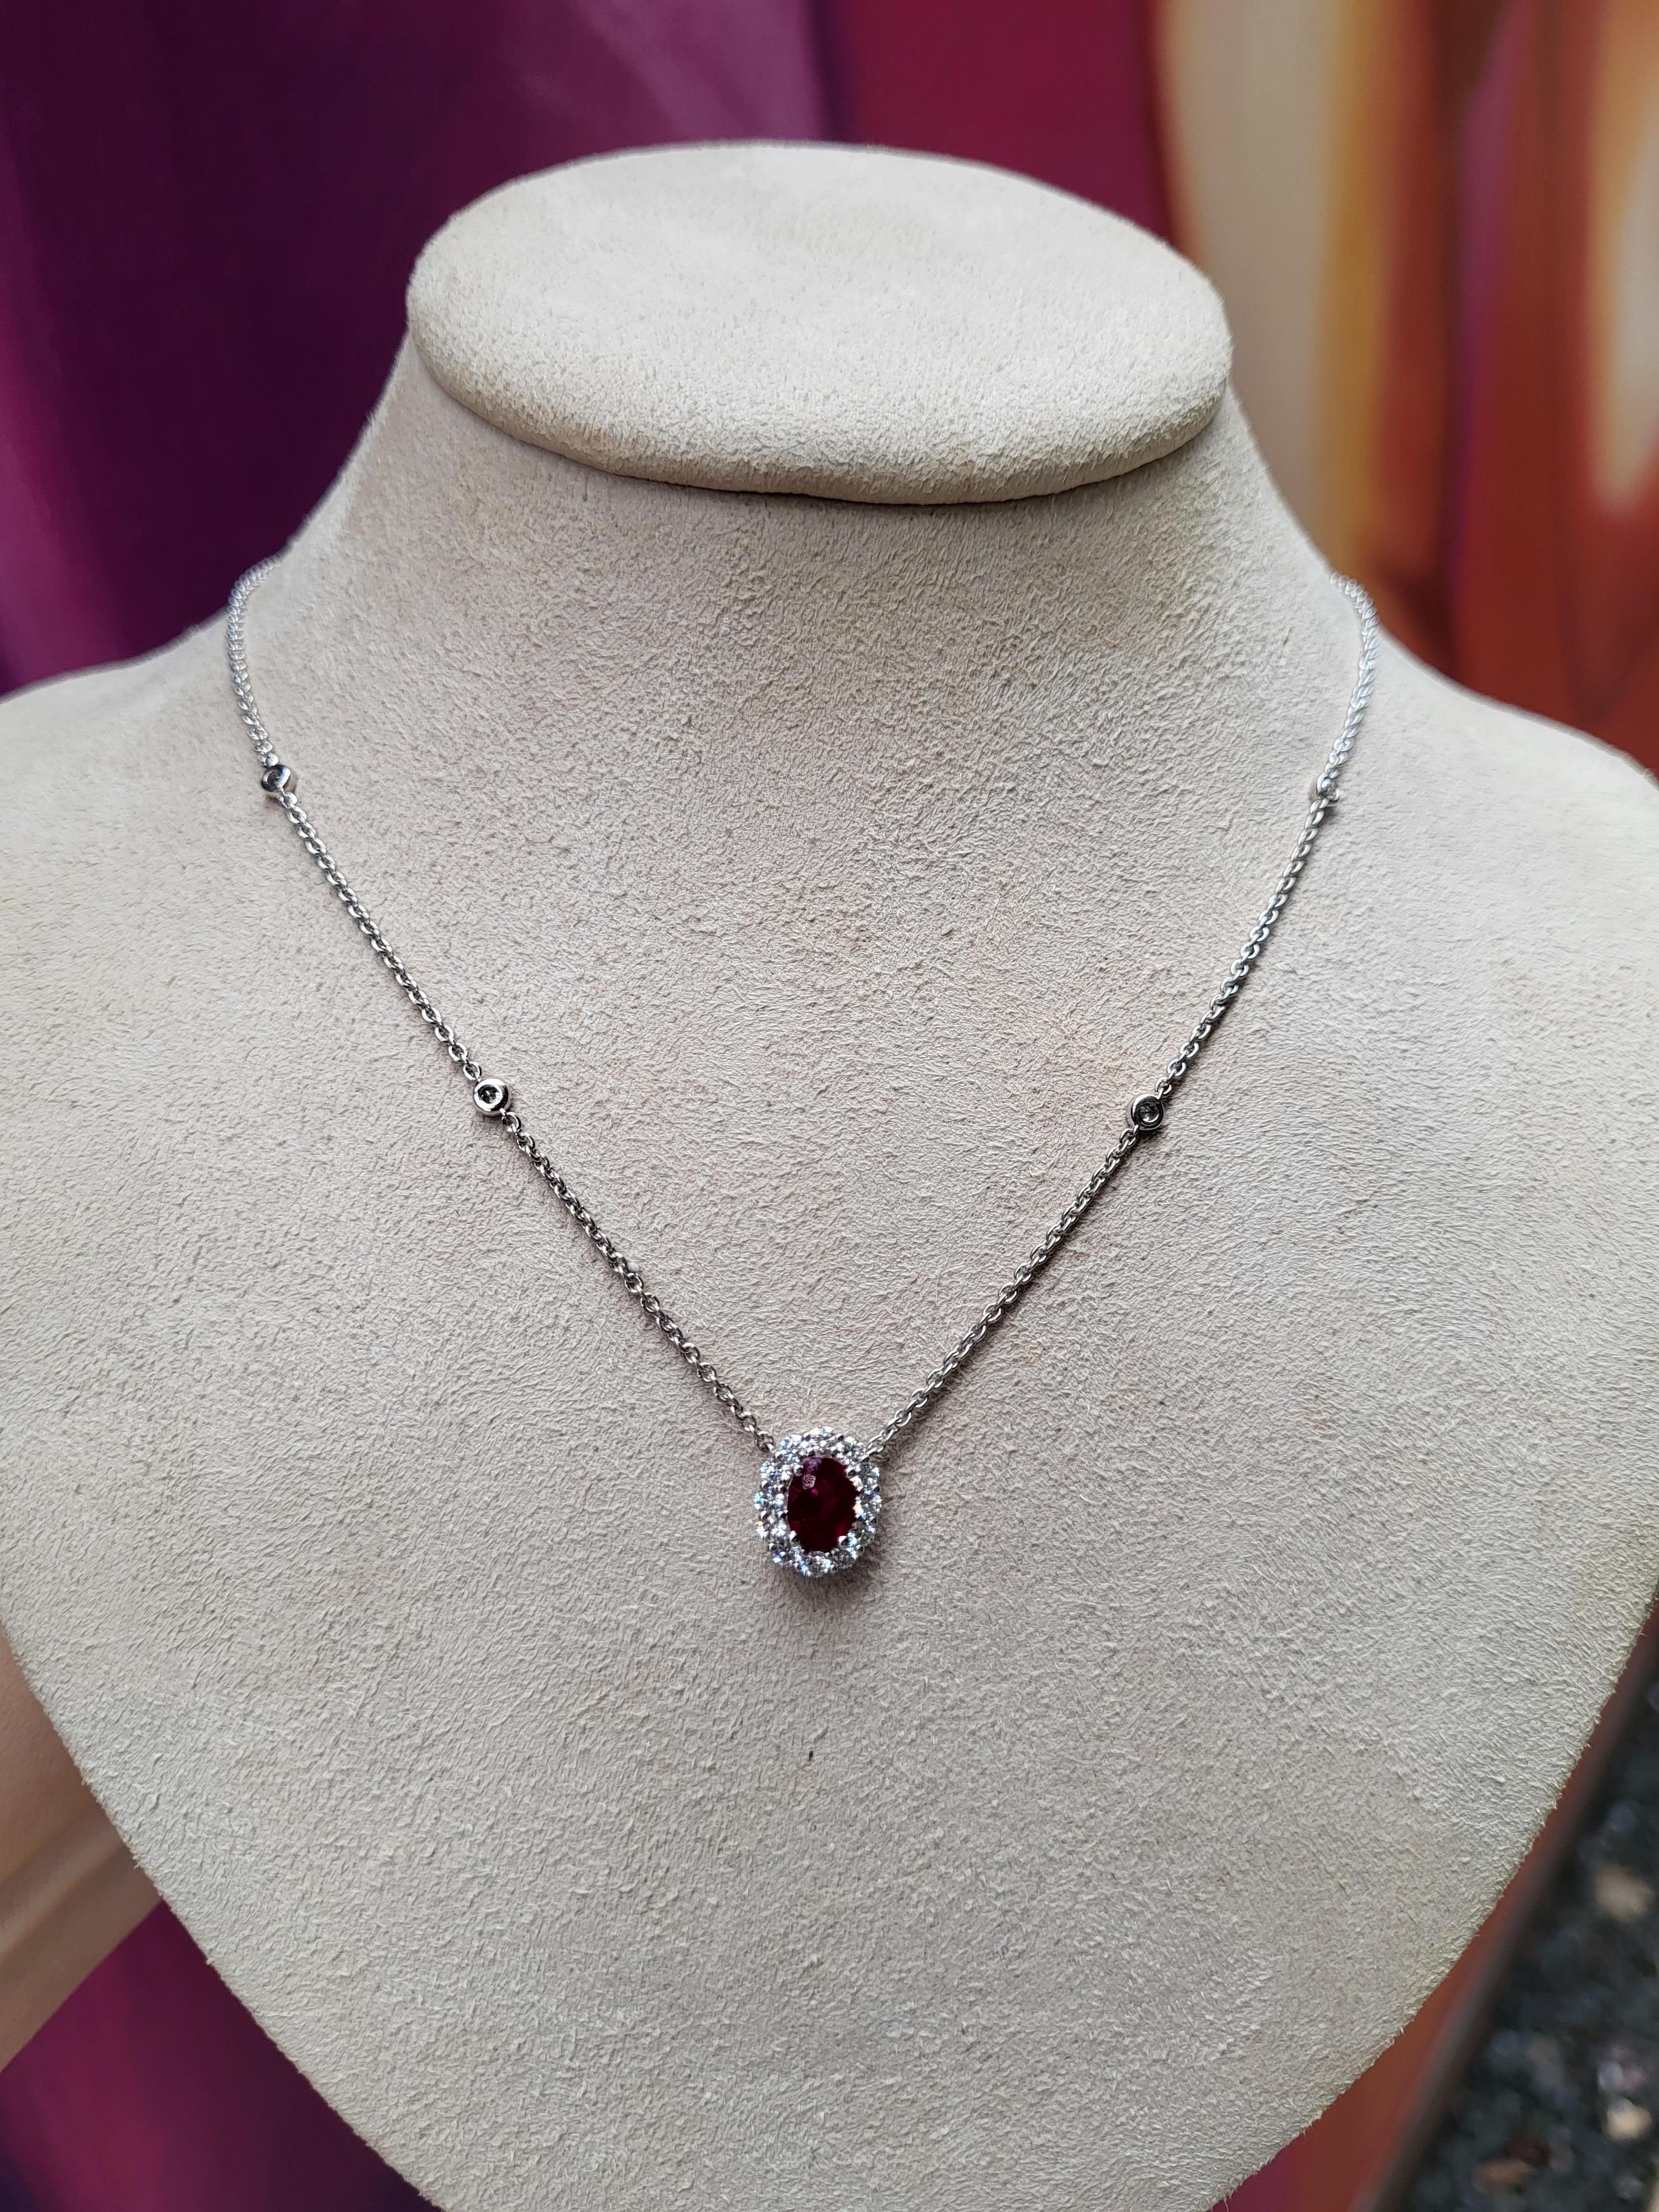 0.71 Carat Oval Cut Natural Ruby & Diamond Pendant Necklace, 18 Karat White Gold In New Condition For Sale In Houston, TX